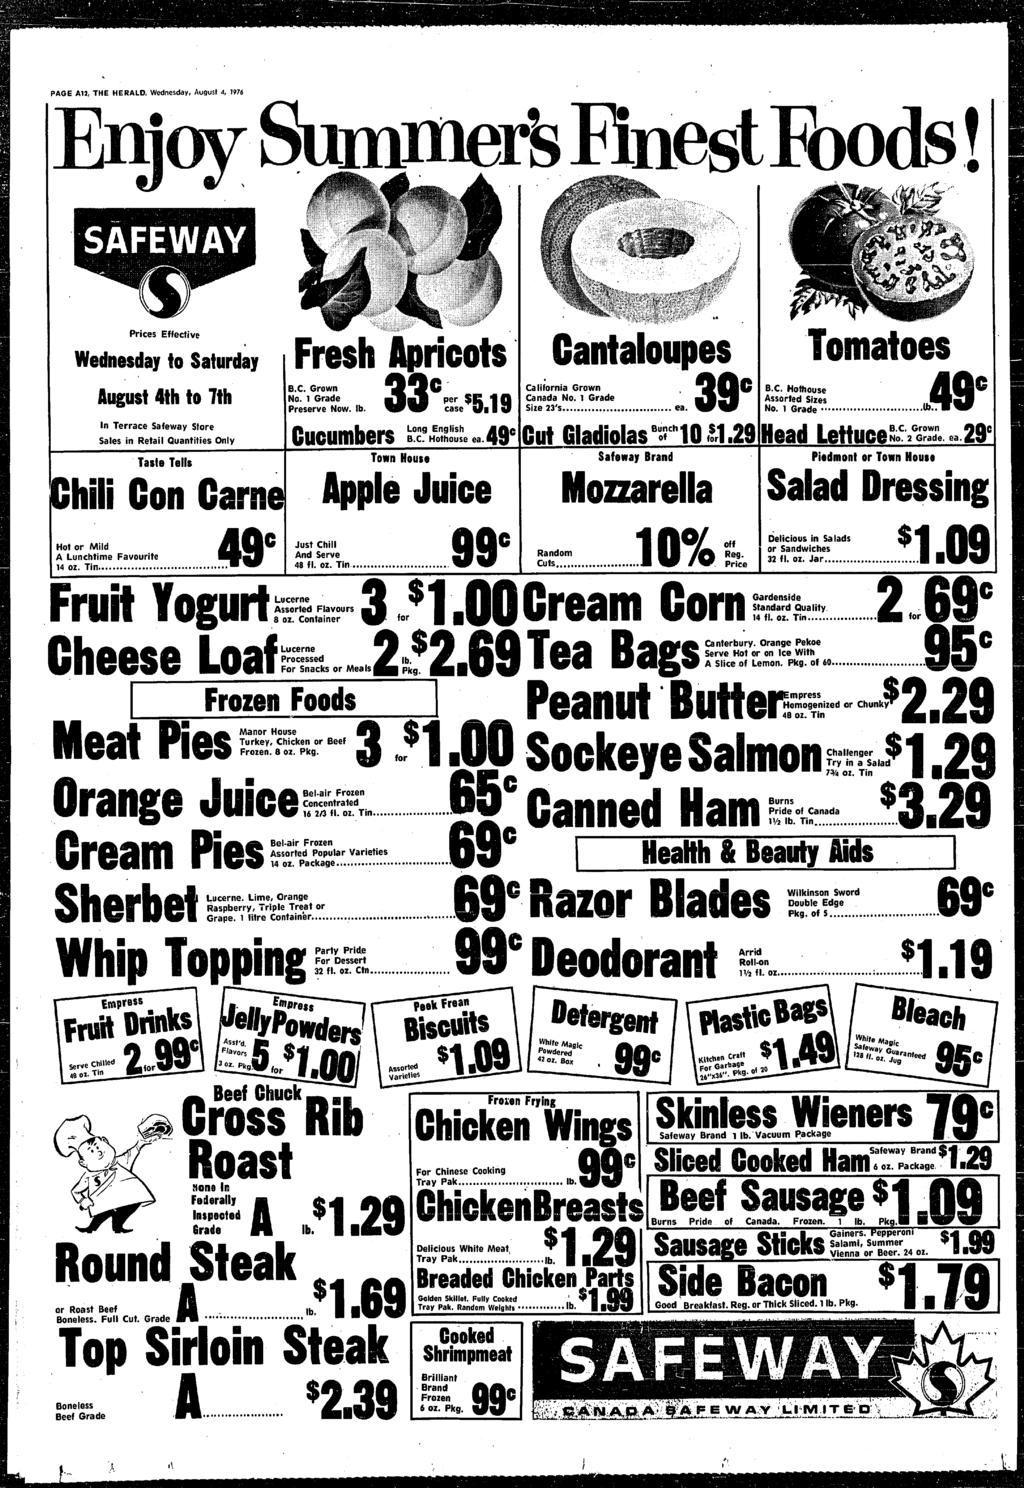 PAGE A12, THE HERALD, Wednesday, August 4, 1976 Enjoy Fnest Foods,!1. ) ' ~,~,,'~'~'...!~J~"~'~J~!~ " ~'~"~,'~"~;~:!~~ Wednesda'y~;o"Saturday, Fresh... Apr ots Cantaloupes Tomatoes rreservenow, b. 33.